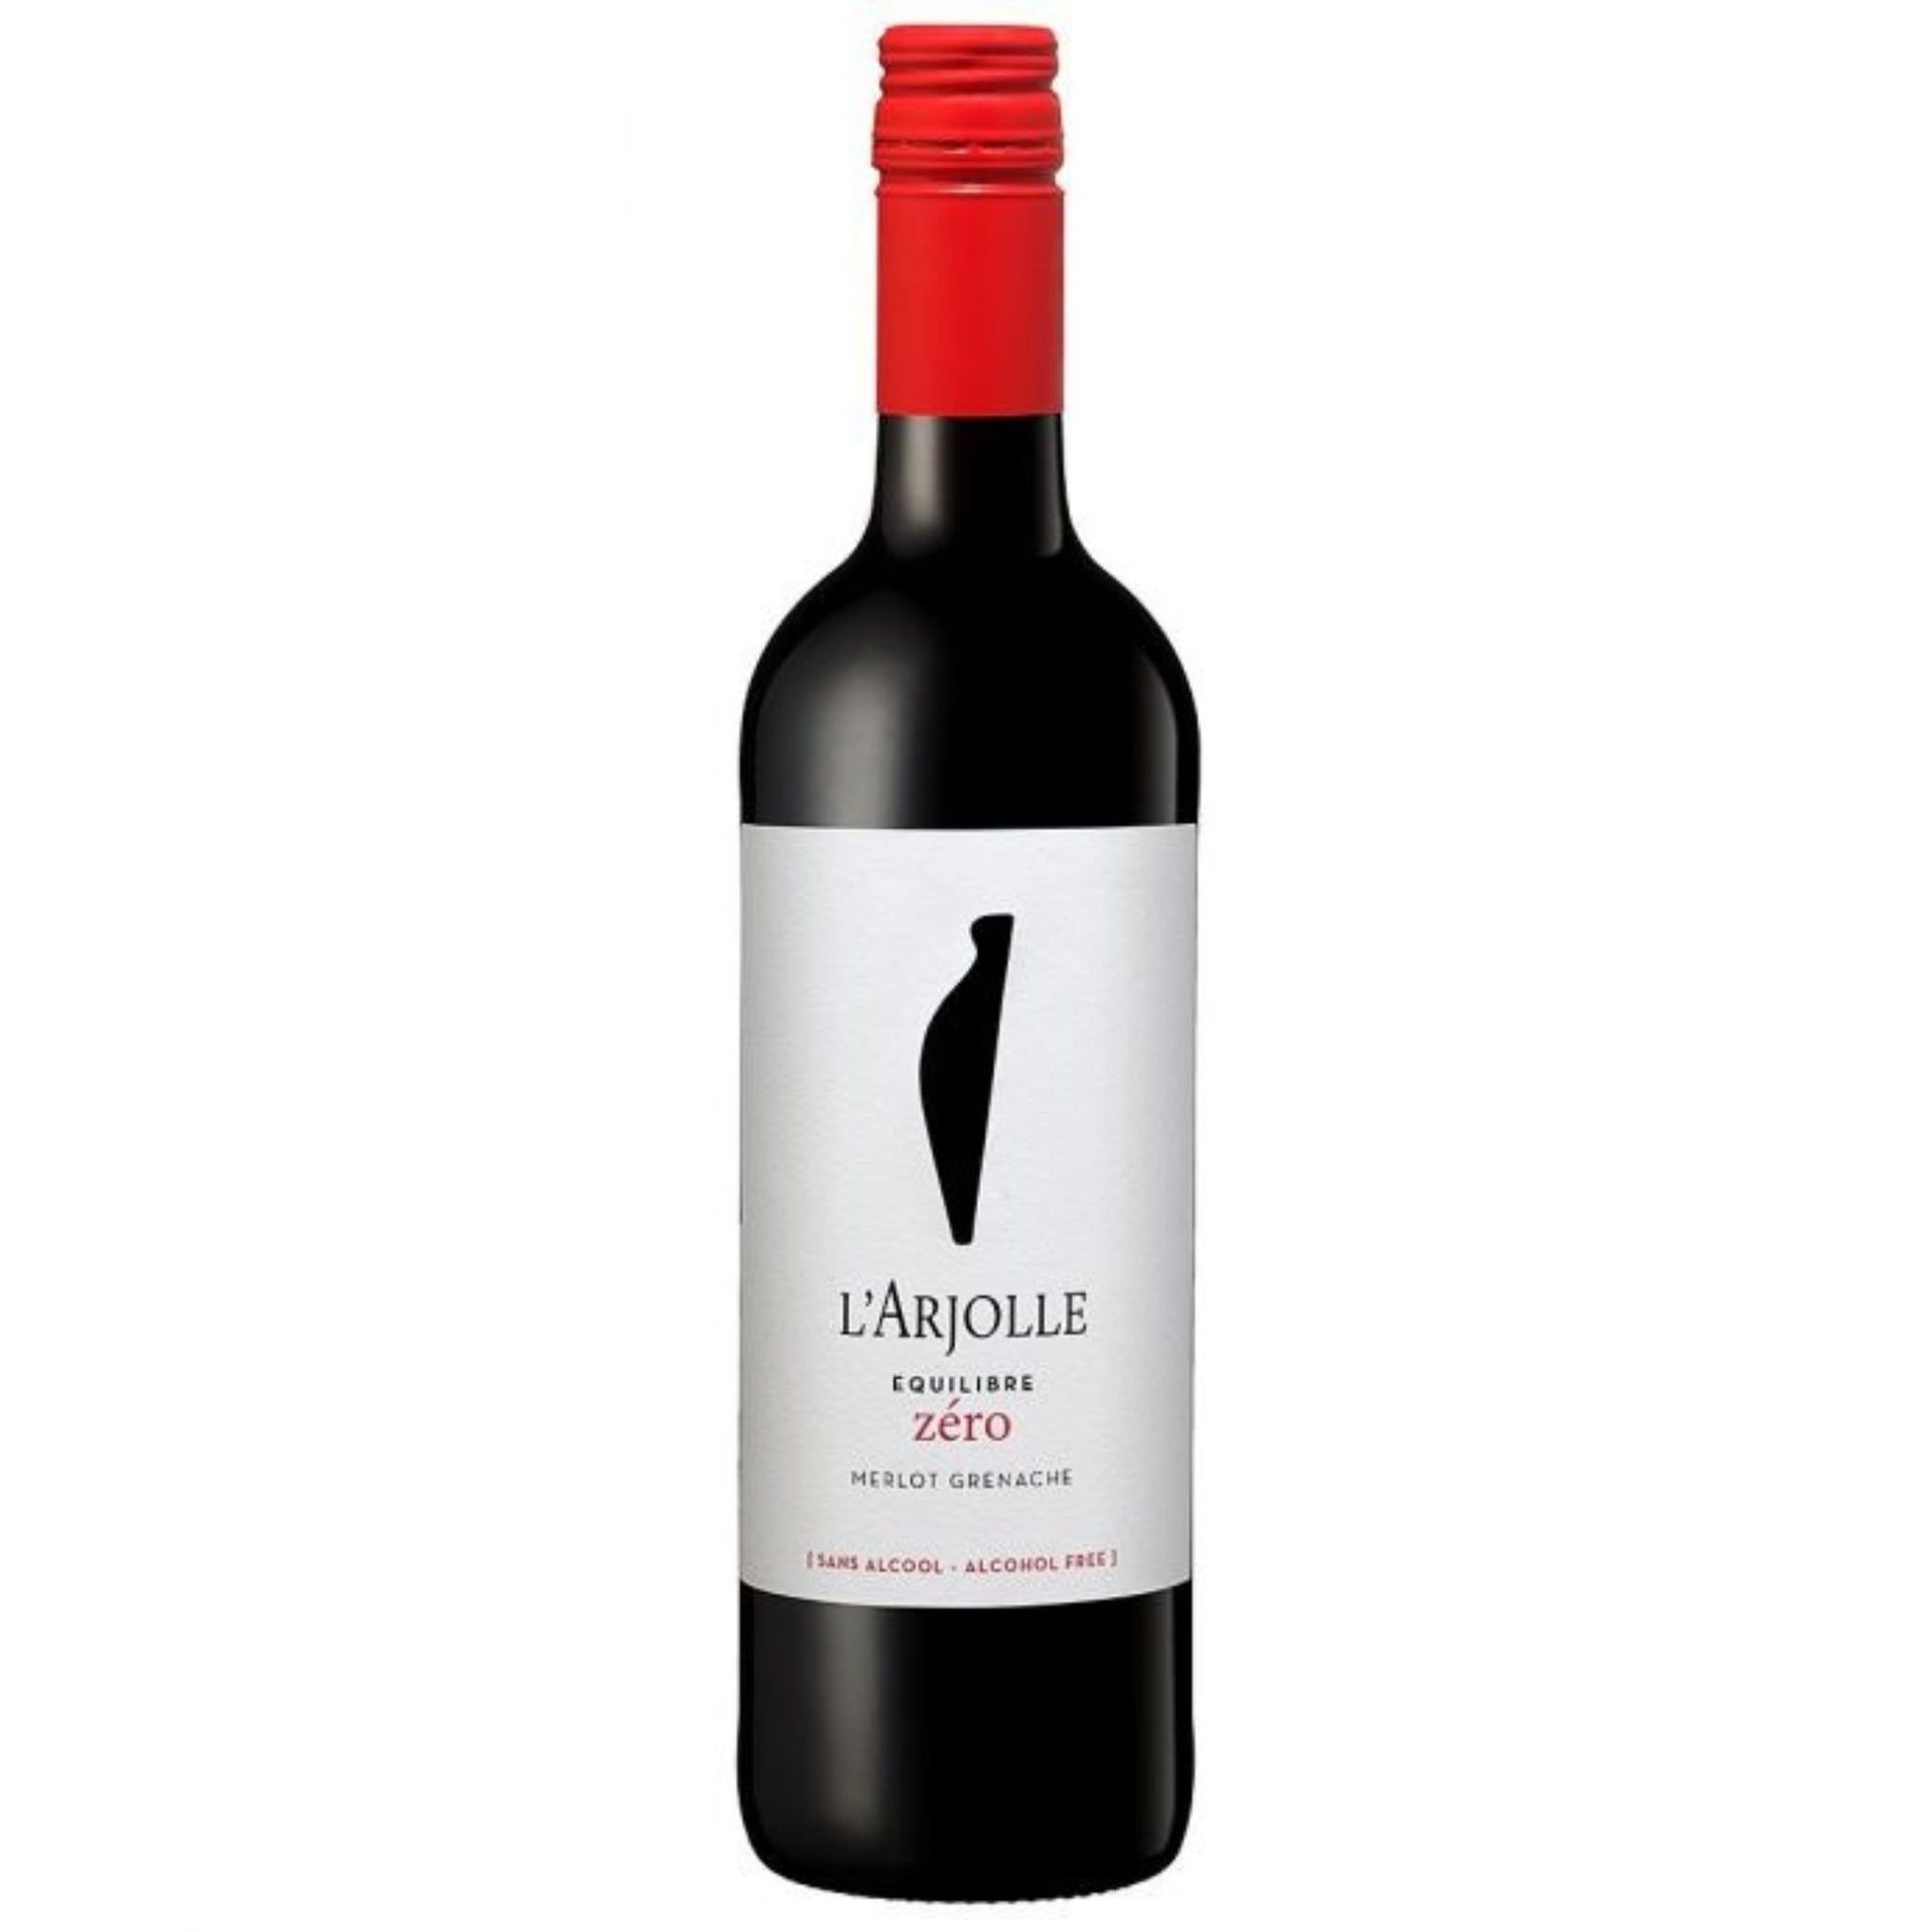 L'Arjolle Equilibre Zero Merlot Grenache non-alcoholic wine is available for sale at Knyota Drinks in Ottawa.